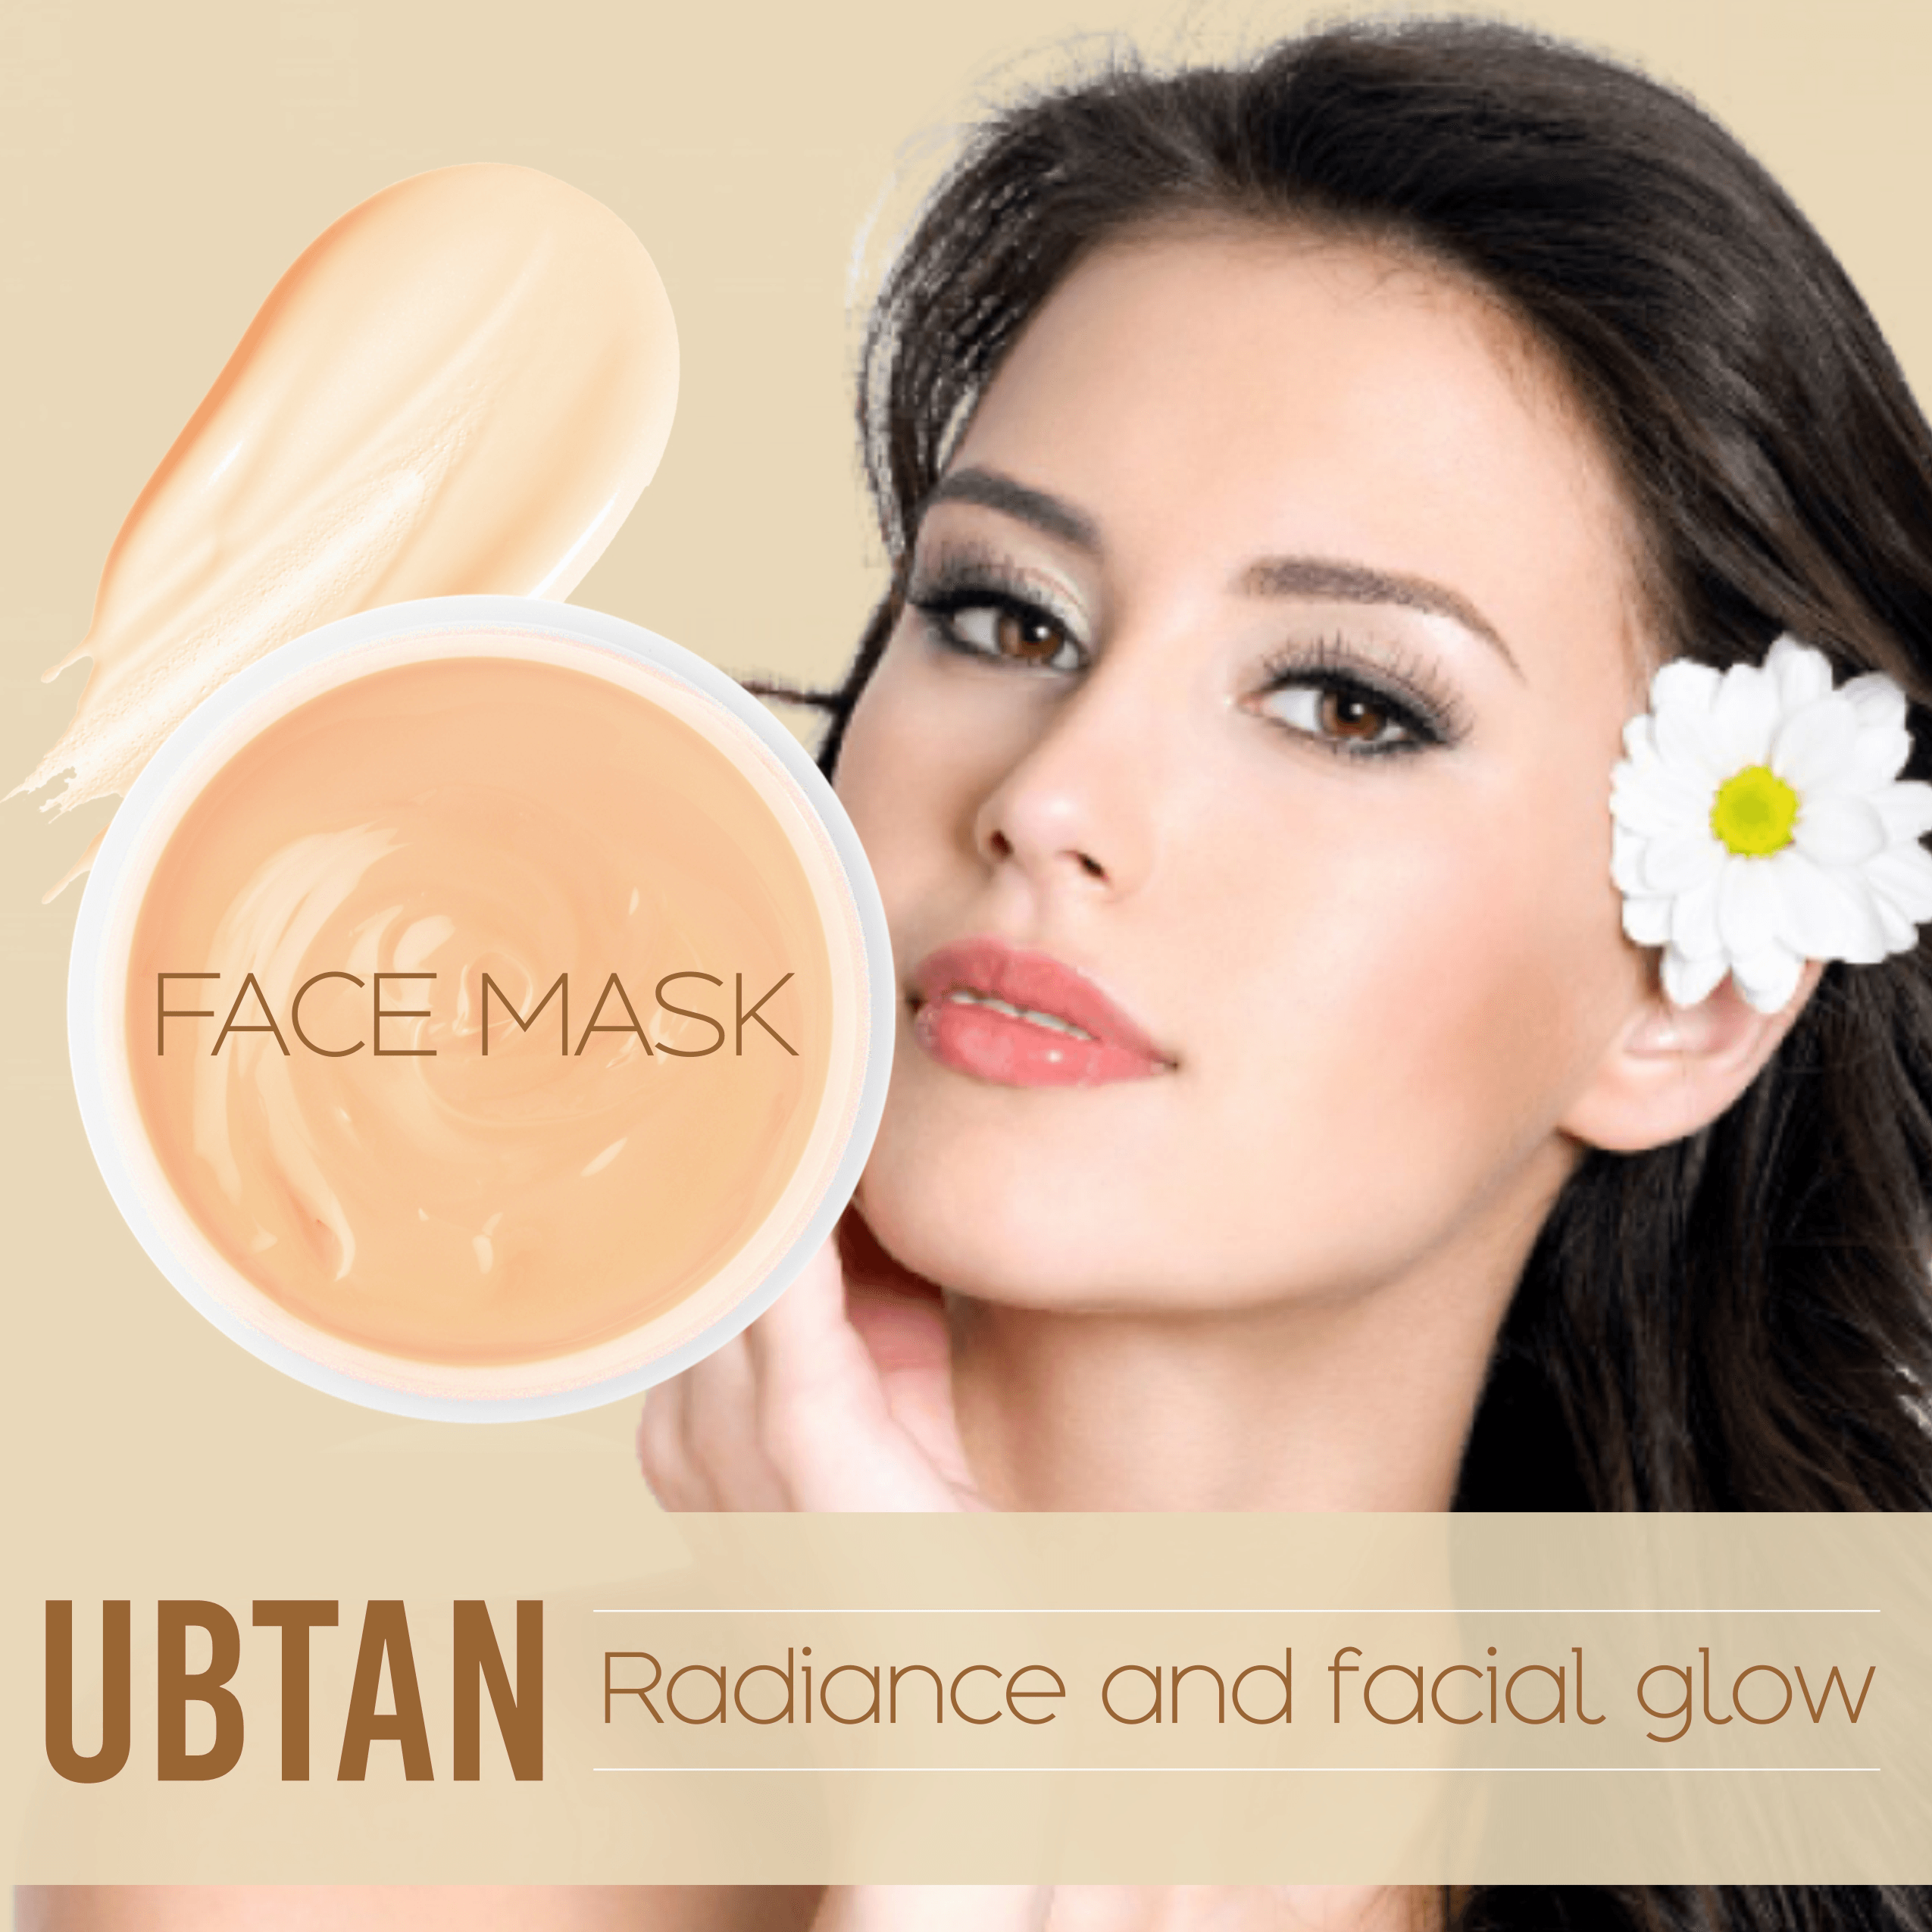 Ubtan Face Mask For Radiance & Facial Glow 100gm - Pink Root